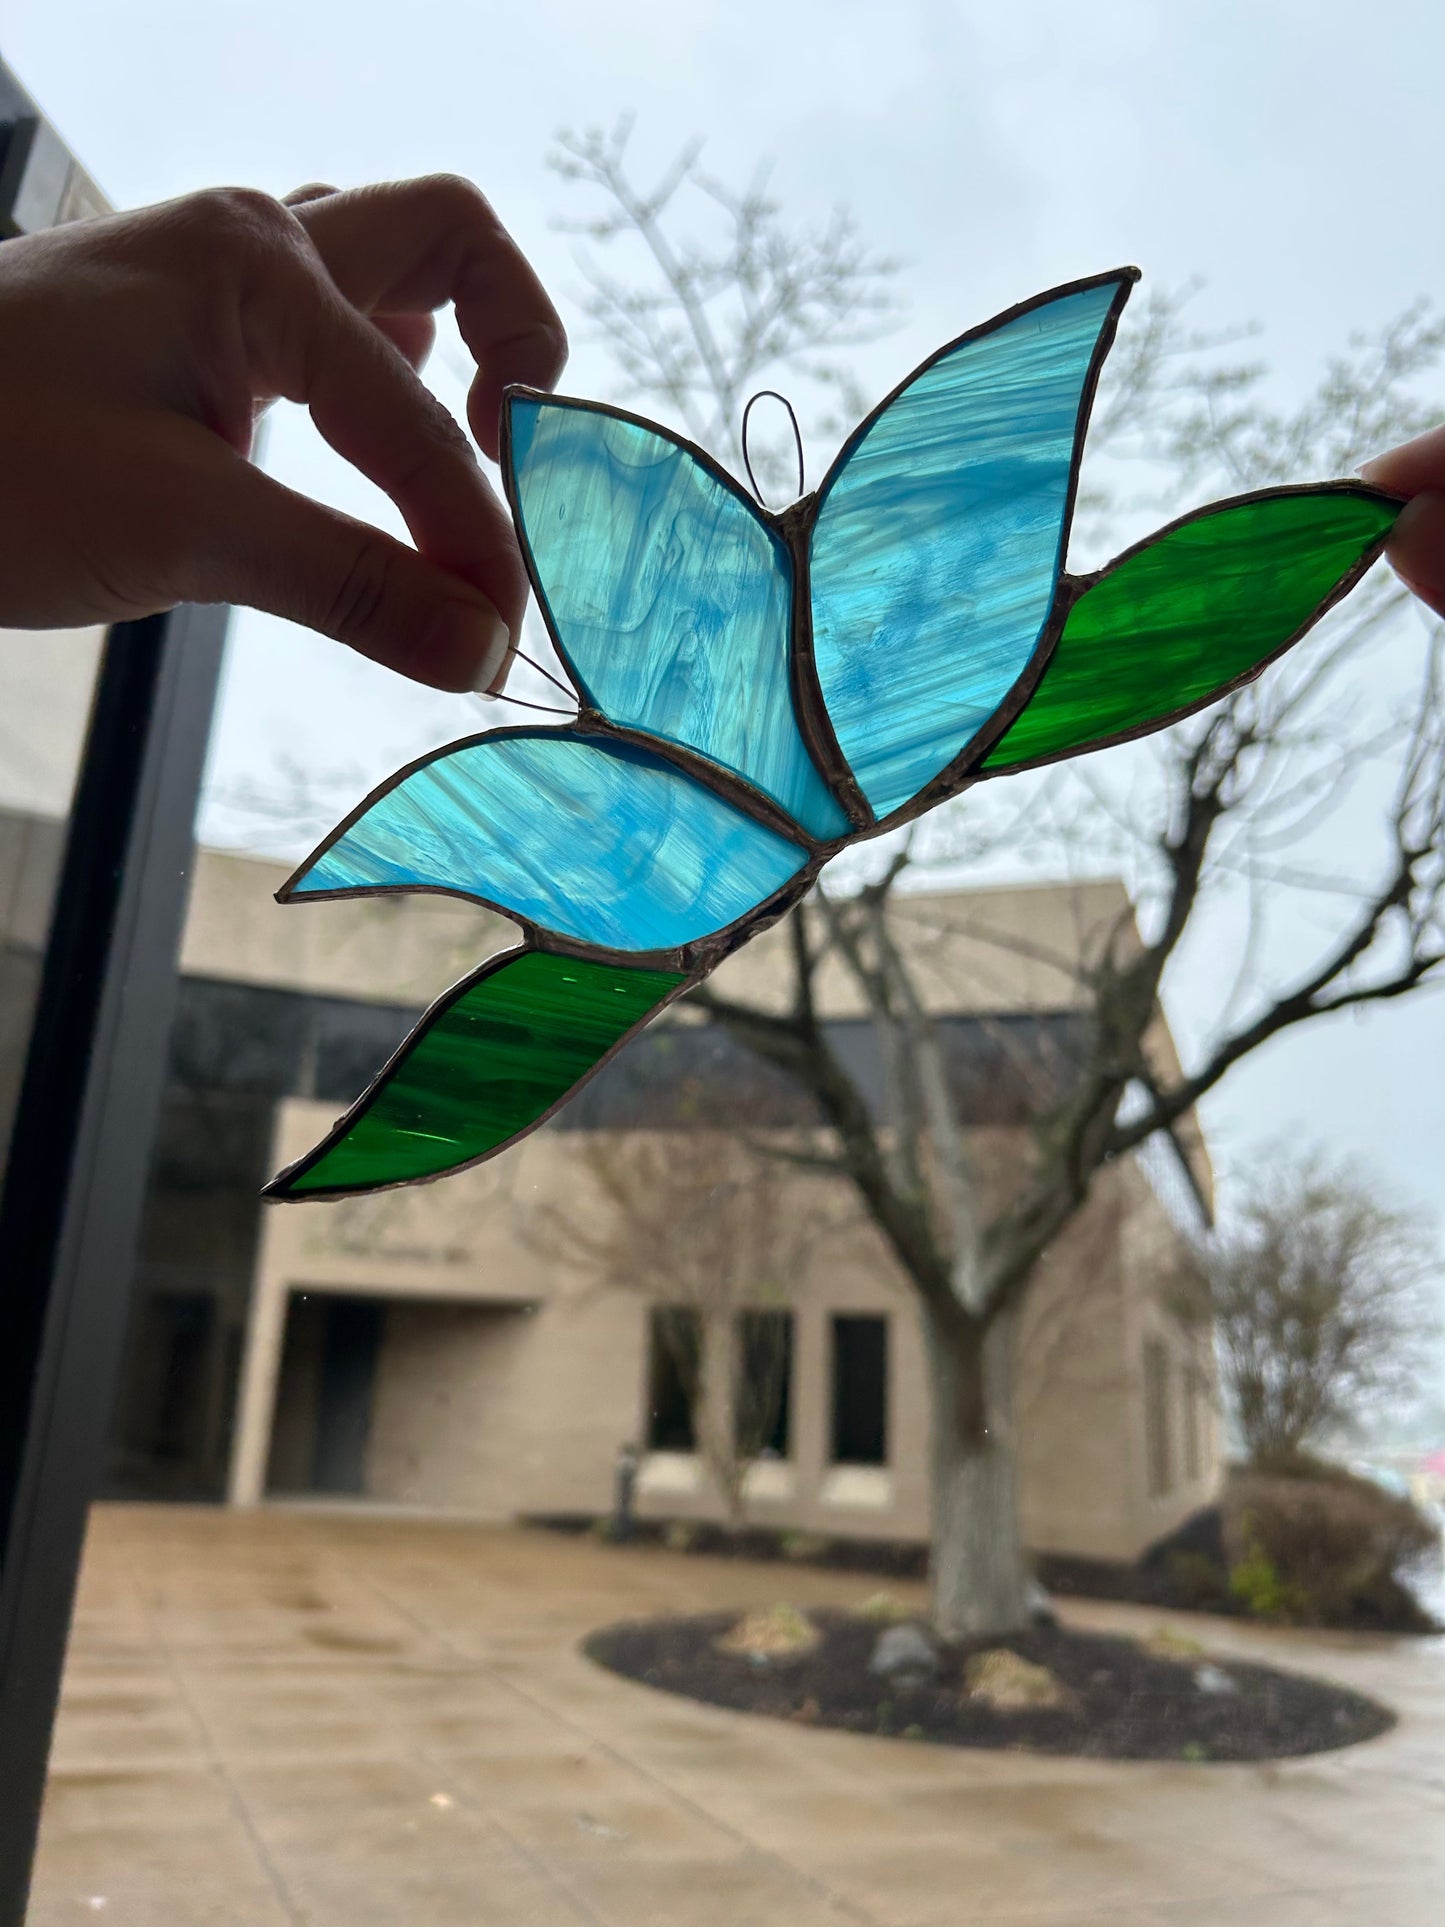 Beginner Stained Glass class, March 21, 4-6:30 pm